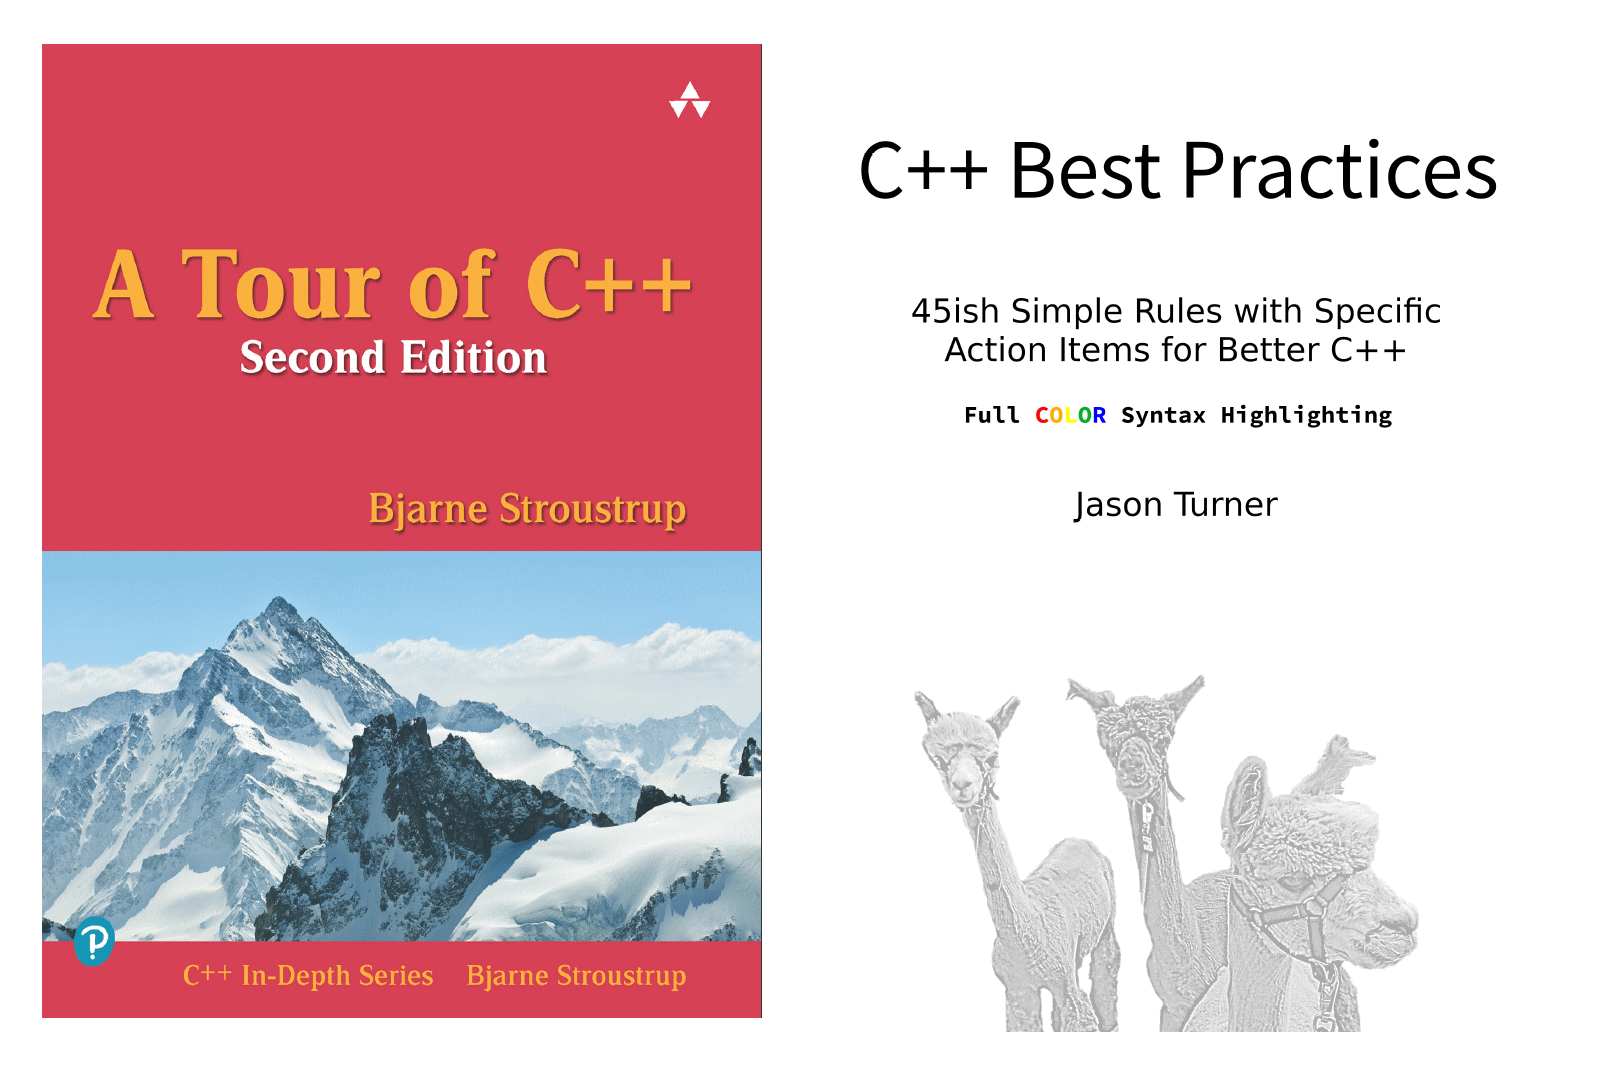 Covers of “A Tour of C++” and “C++ Best Practices”